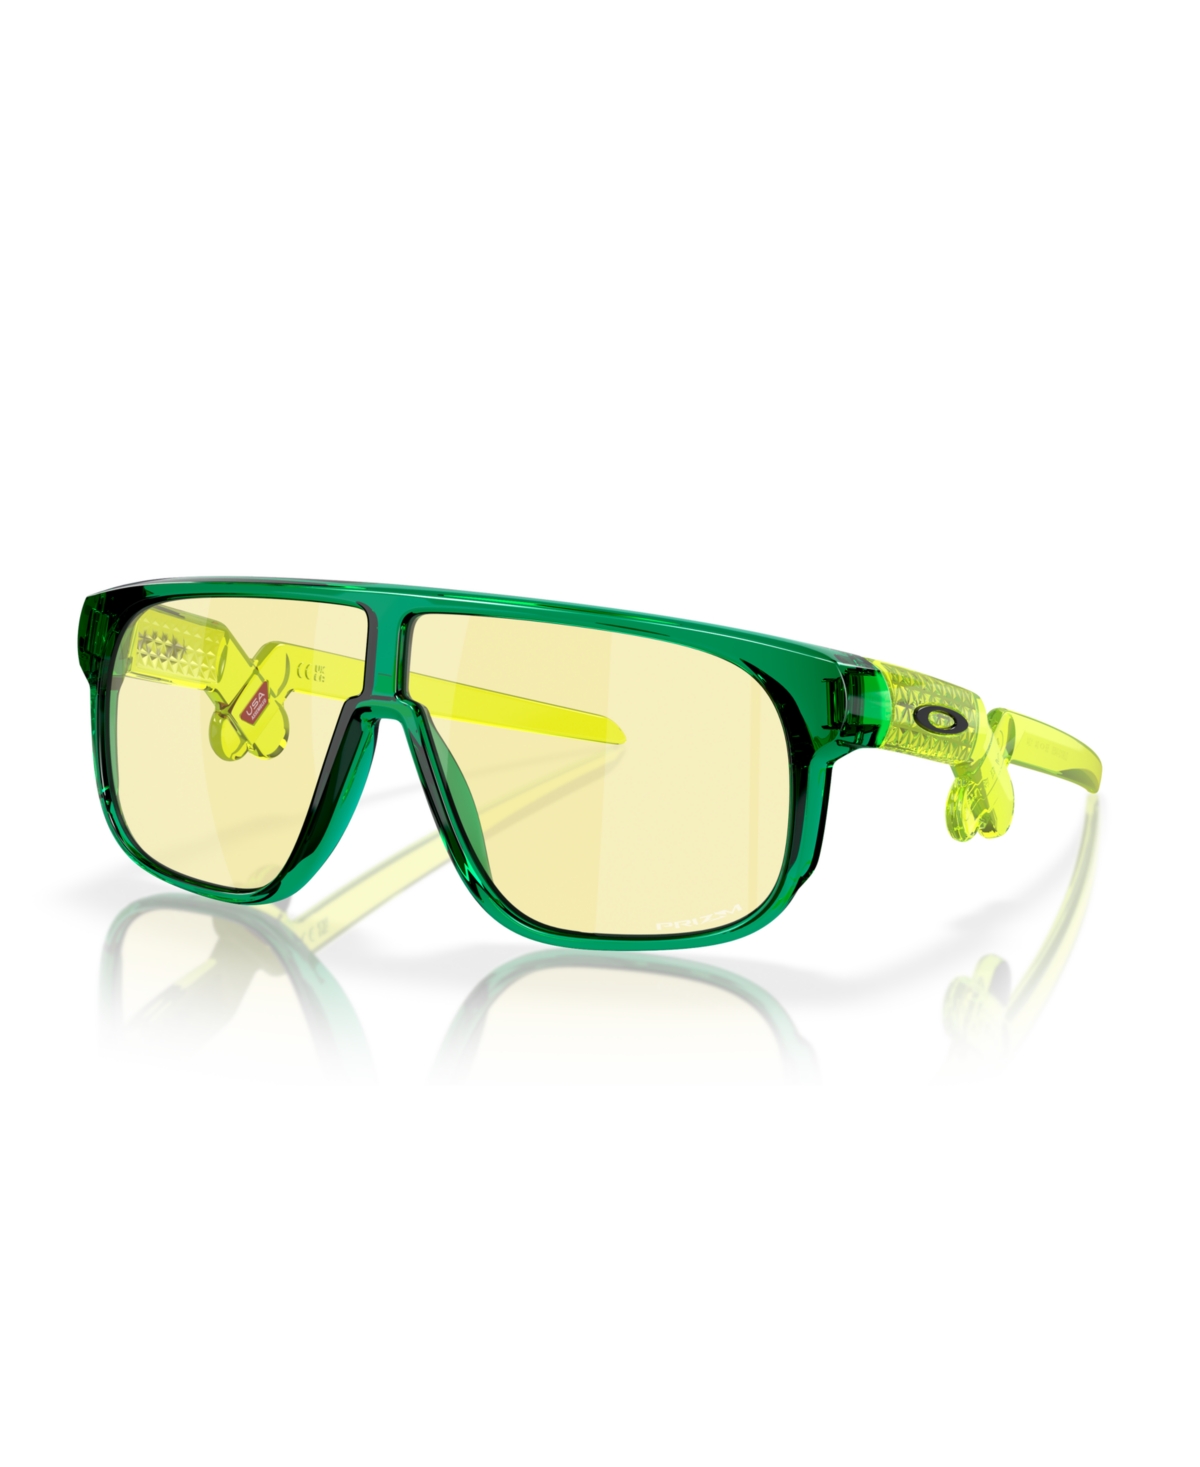 Oakley Jr Kid's Sunglasses, Inverter Youth Fit Gaming Collection Oj9012 In Crystal Green